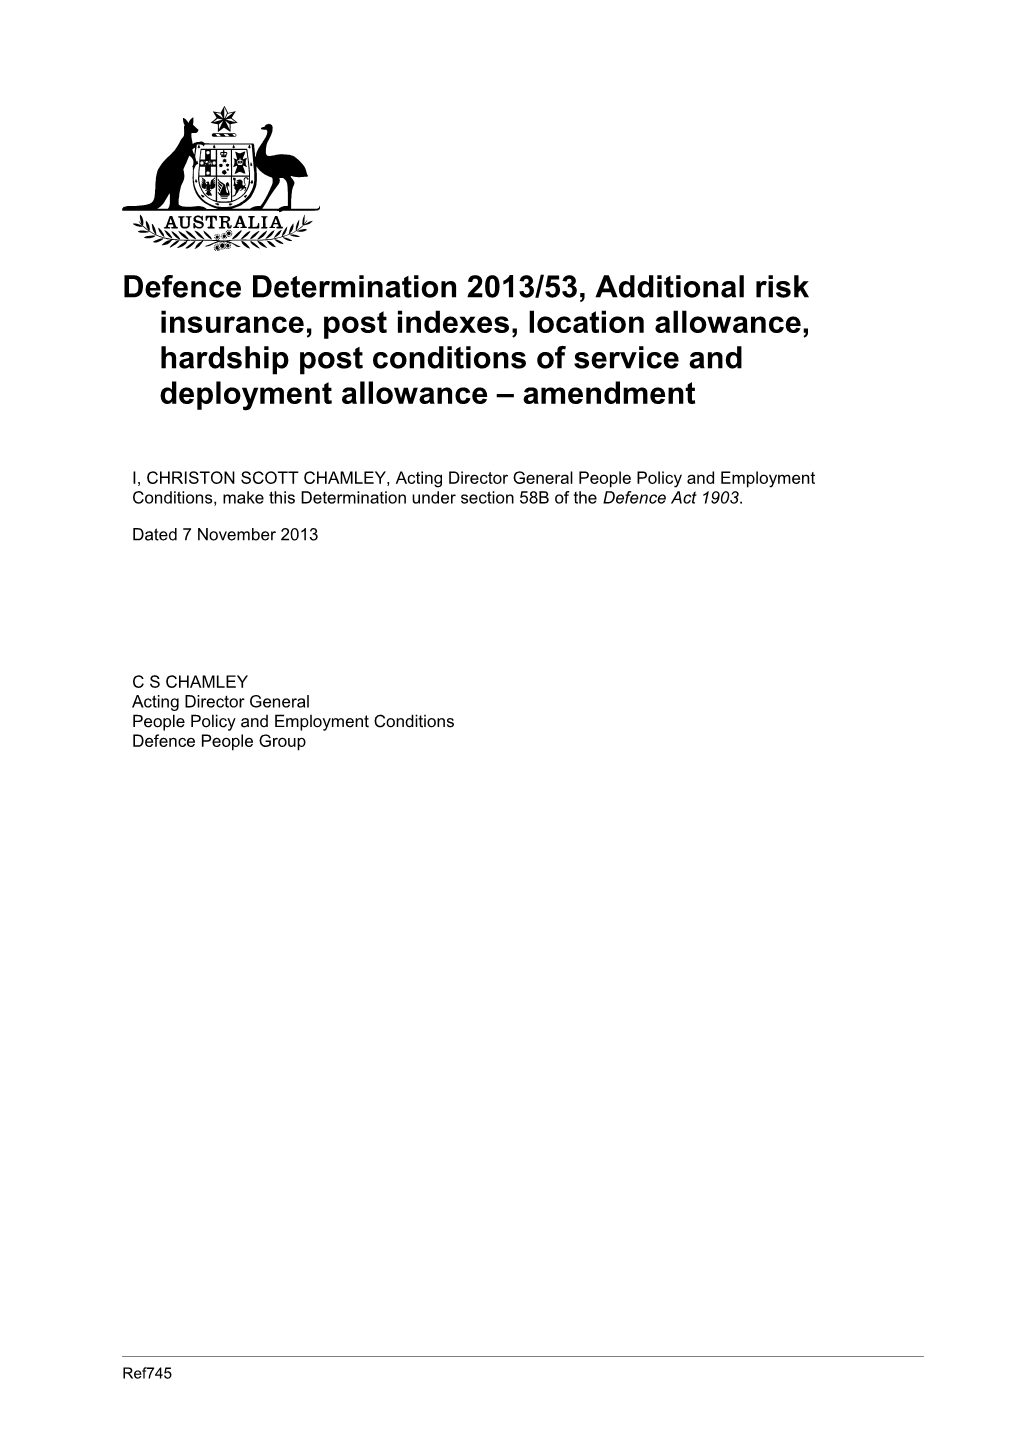 Defence Determination 2013/53, Additional Risk Insurance, Post Indexes, Location Allowance